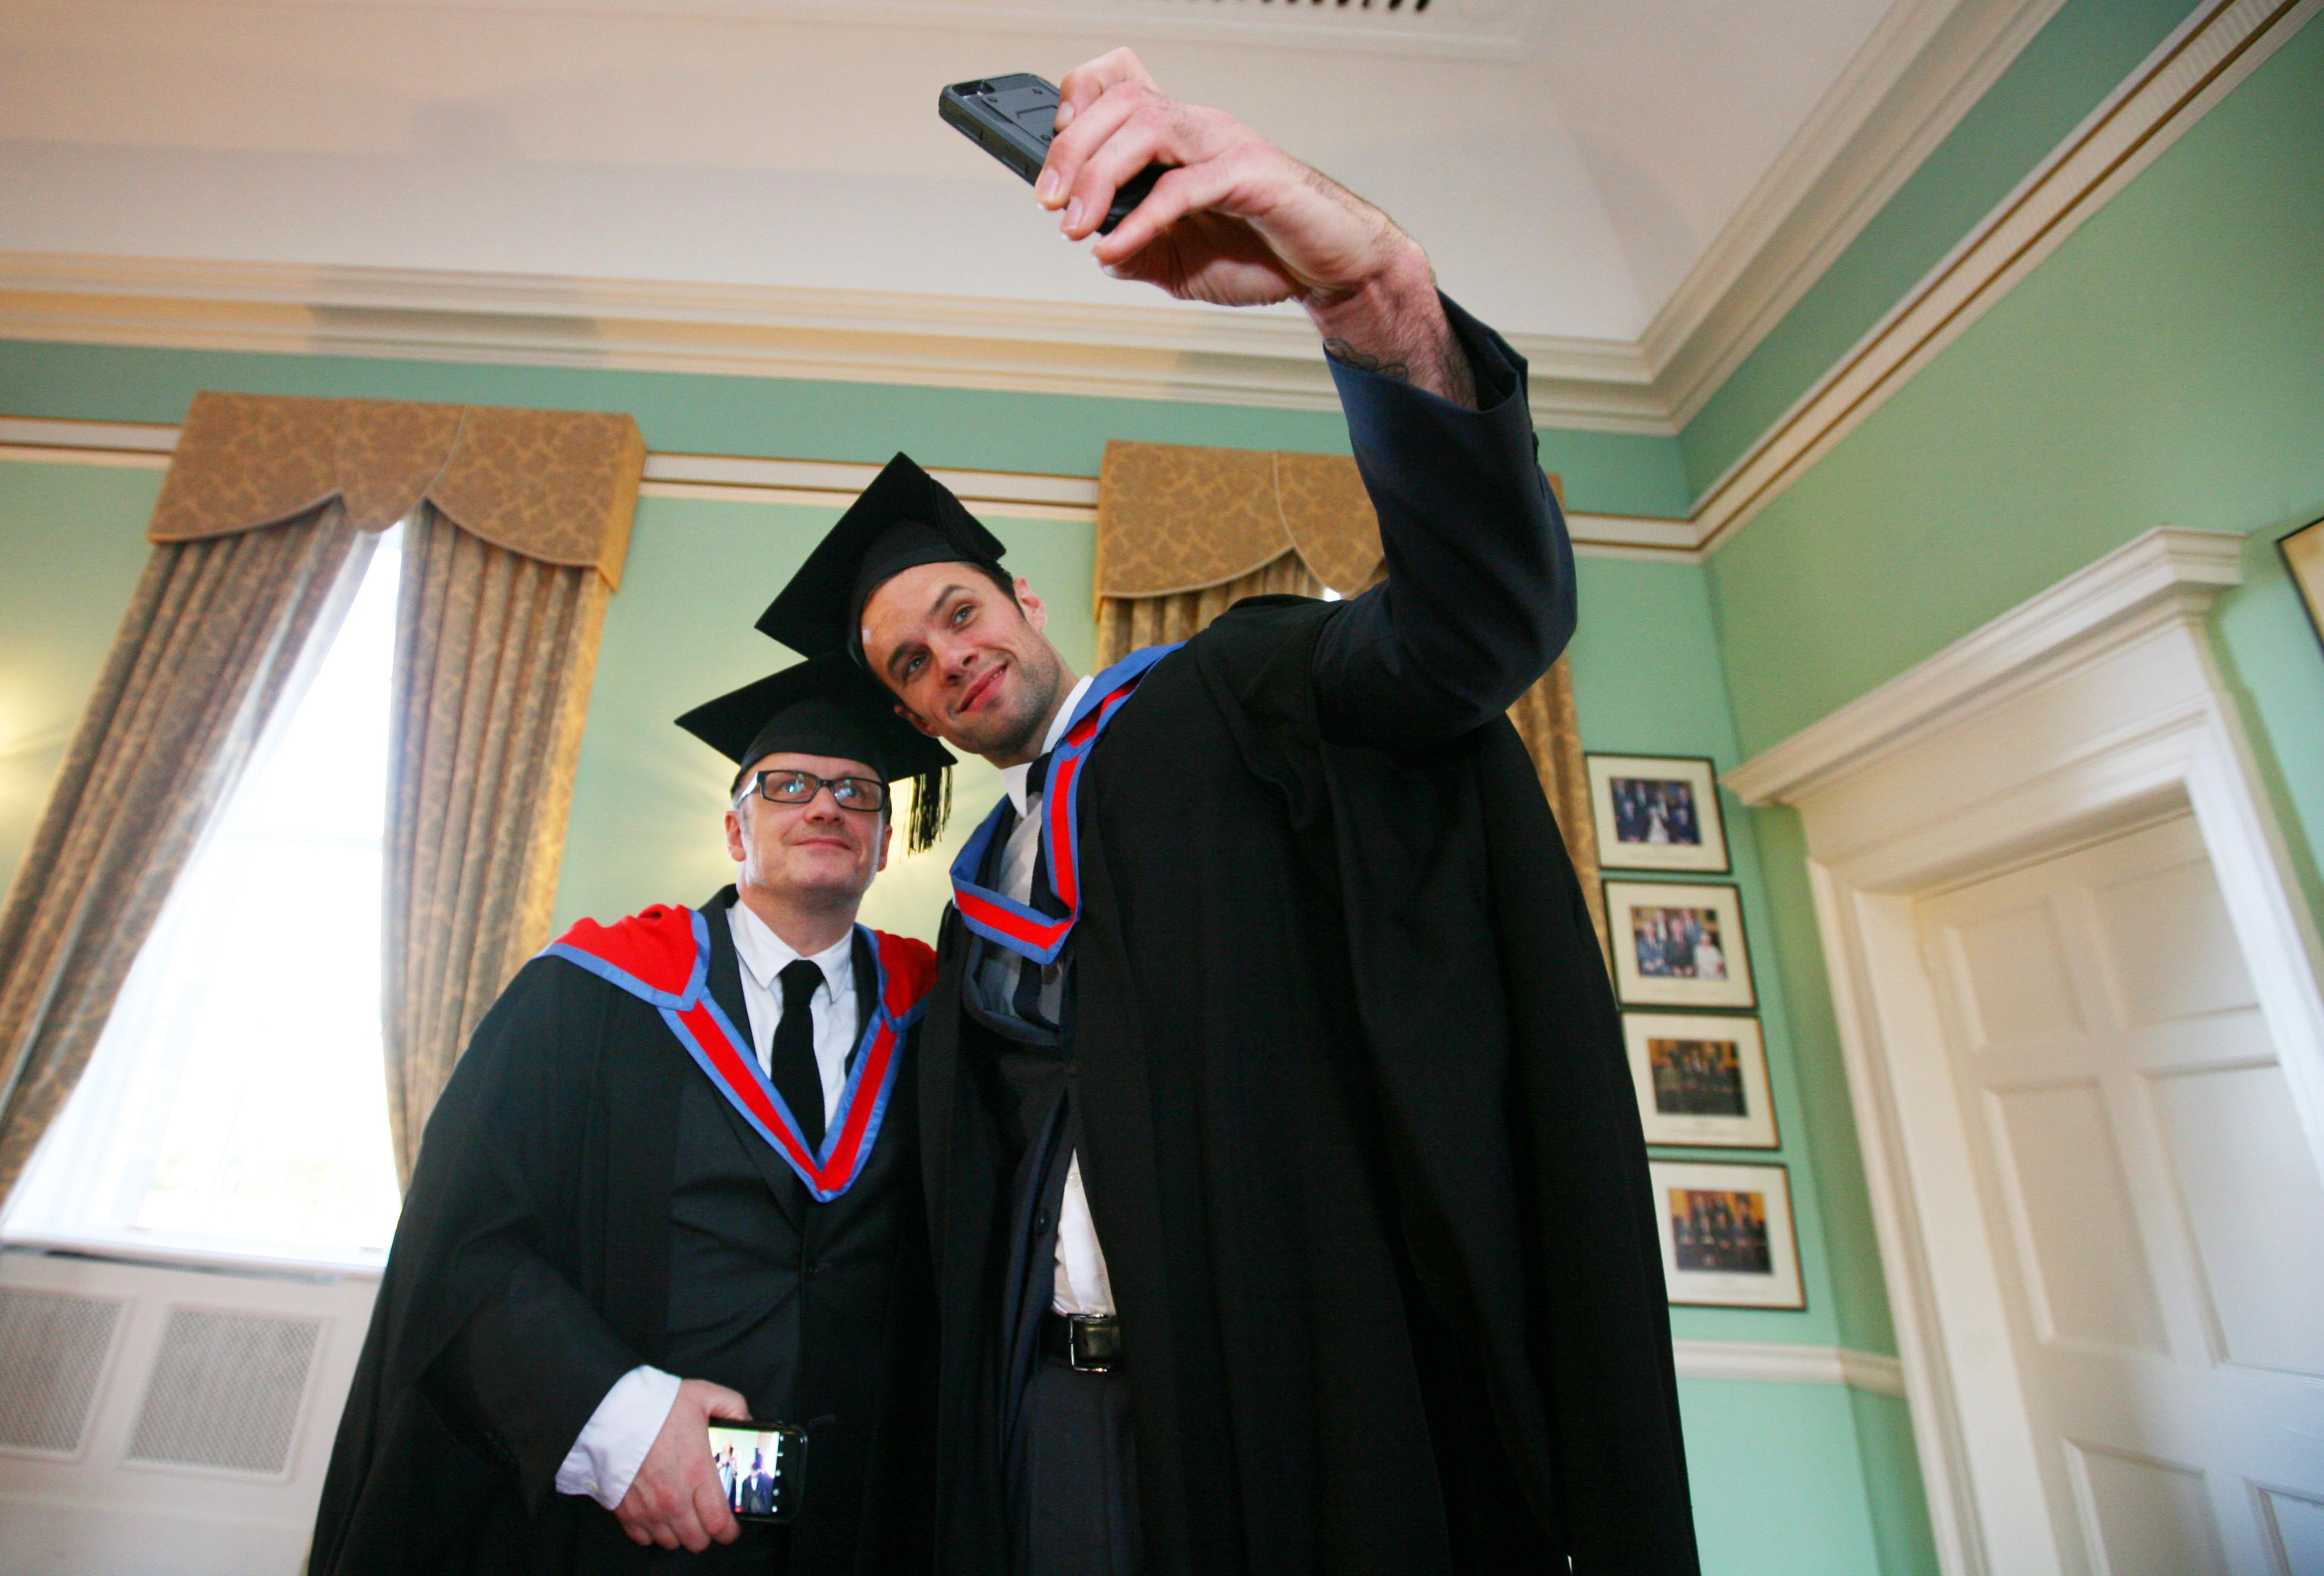 Oscar-nominated director Lenny Abrahamson and Irish musician Niall Breslin (Bressie) receive Honorary Fellows of the Institute of Art, Design + Technology, Dun Laoghaire at a ceremony in the RDS Dublin. Photo Shows. Bressie ( who described himself as a selfie stick) takes a selfie with director Lenny Abrahamson beforereceiving their Honorary Fellows of the Institute of Art, Design + Technology, Dun Laoghaire at a ceremony in the RDS Dublin. Pics Brian Farrell